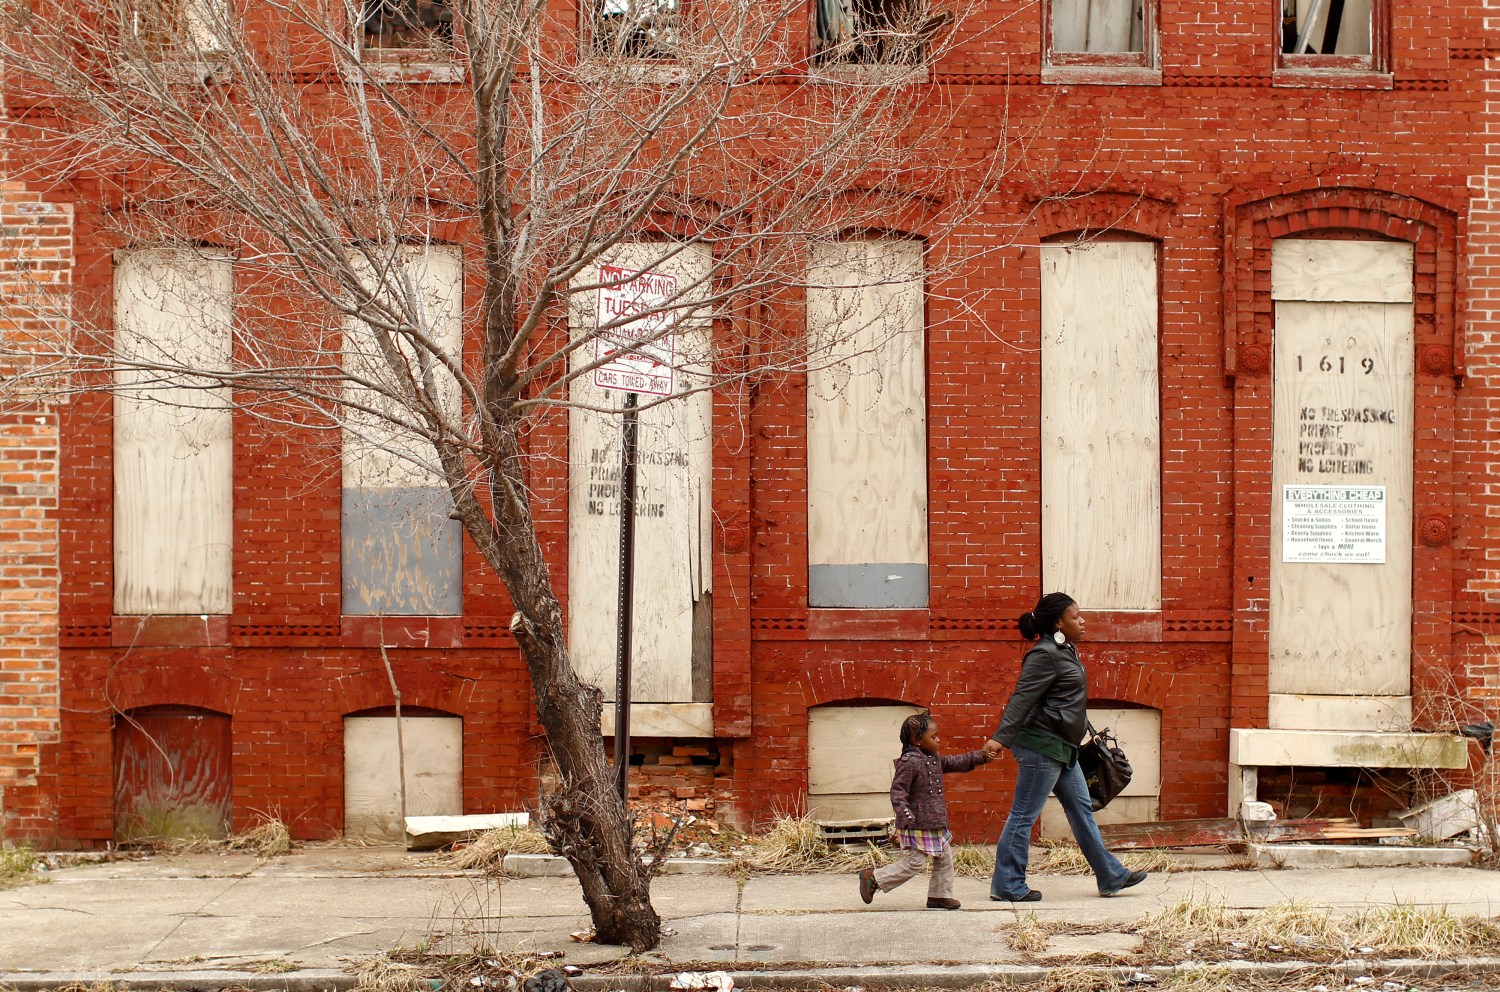 A woman and child walk past a dilapidated building in a run-down neighborhood of Baltimore, Maryland March 9, 2011. REUTERS/Kevin Lamarque (UNITED STATES - Tags: SOCIETY) - GM1E73A0I1C01